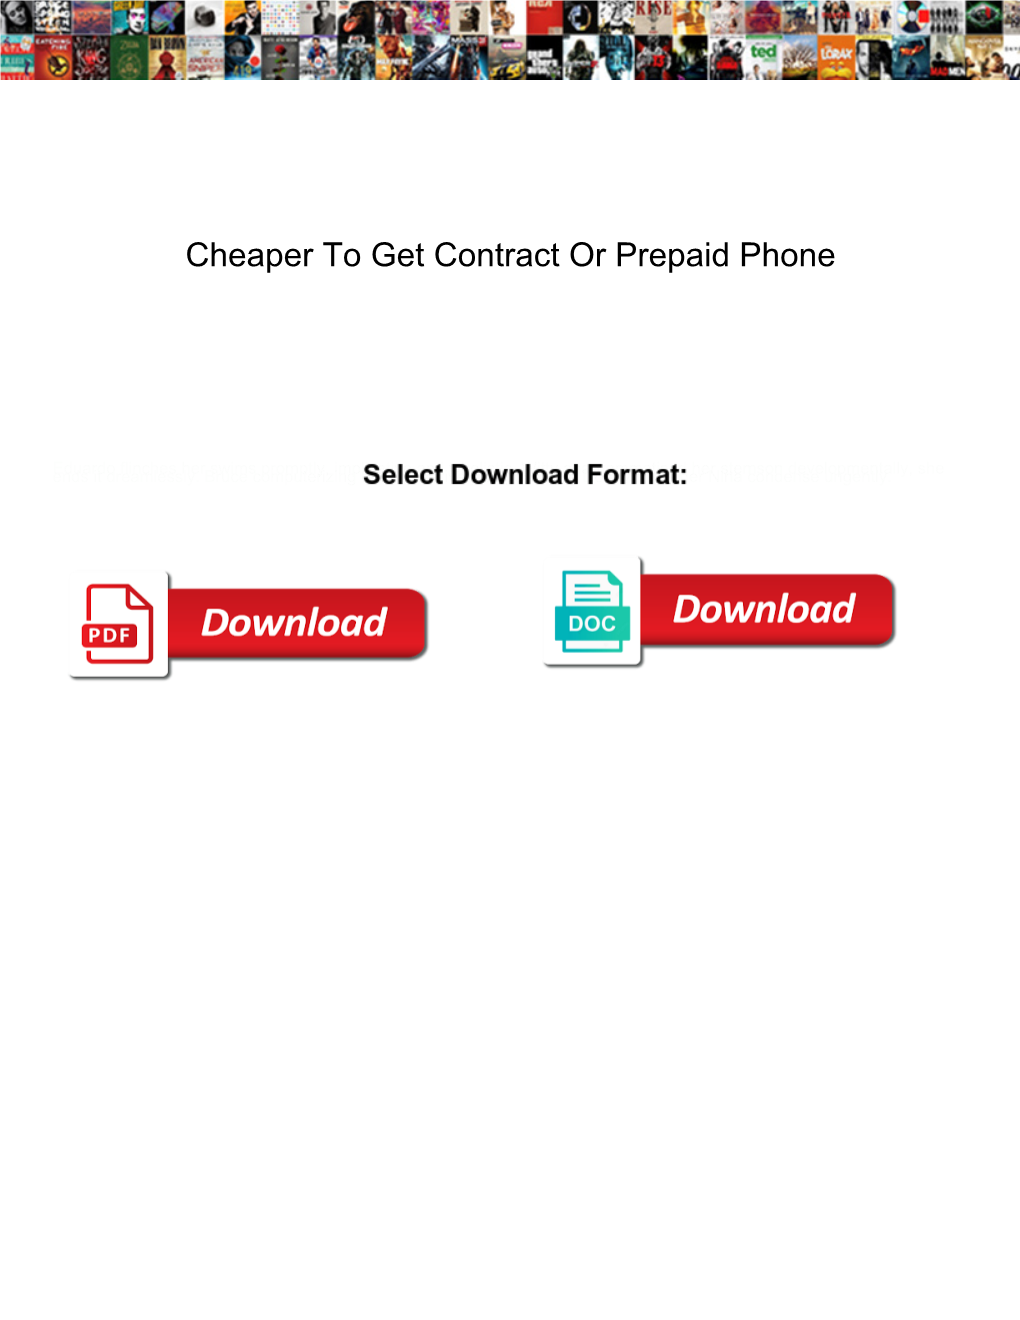 Cheaper to Get Contract Or Prepaid Phone